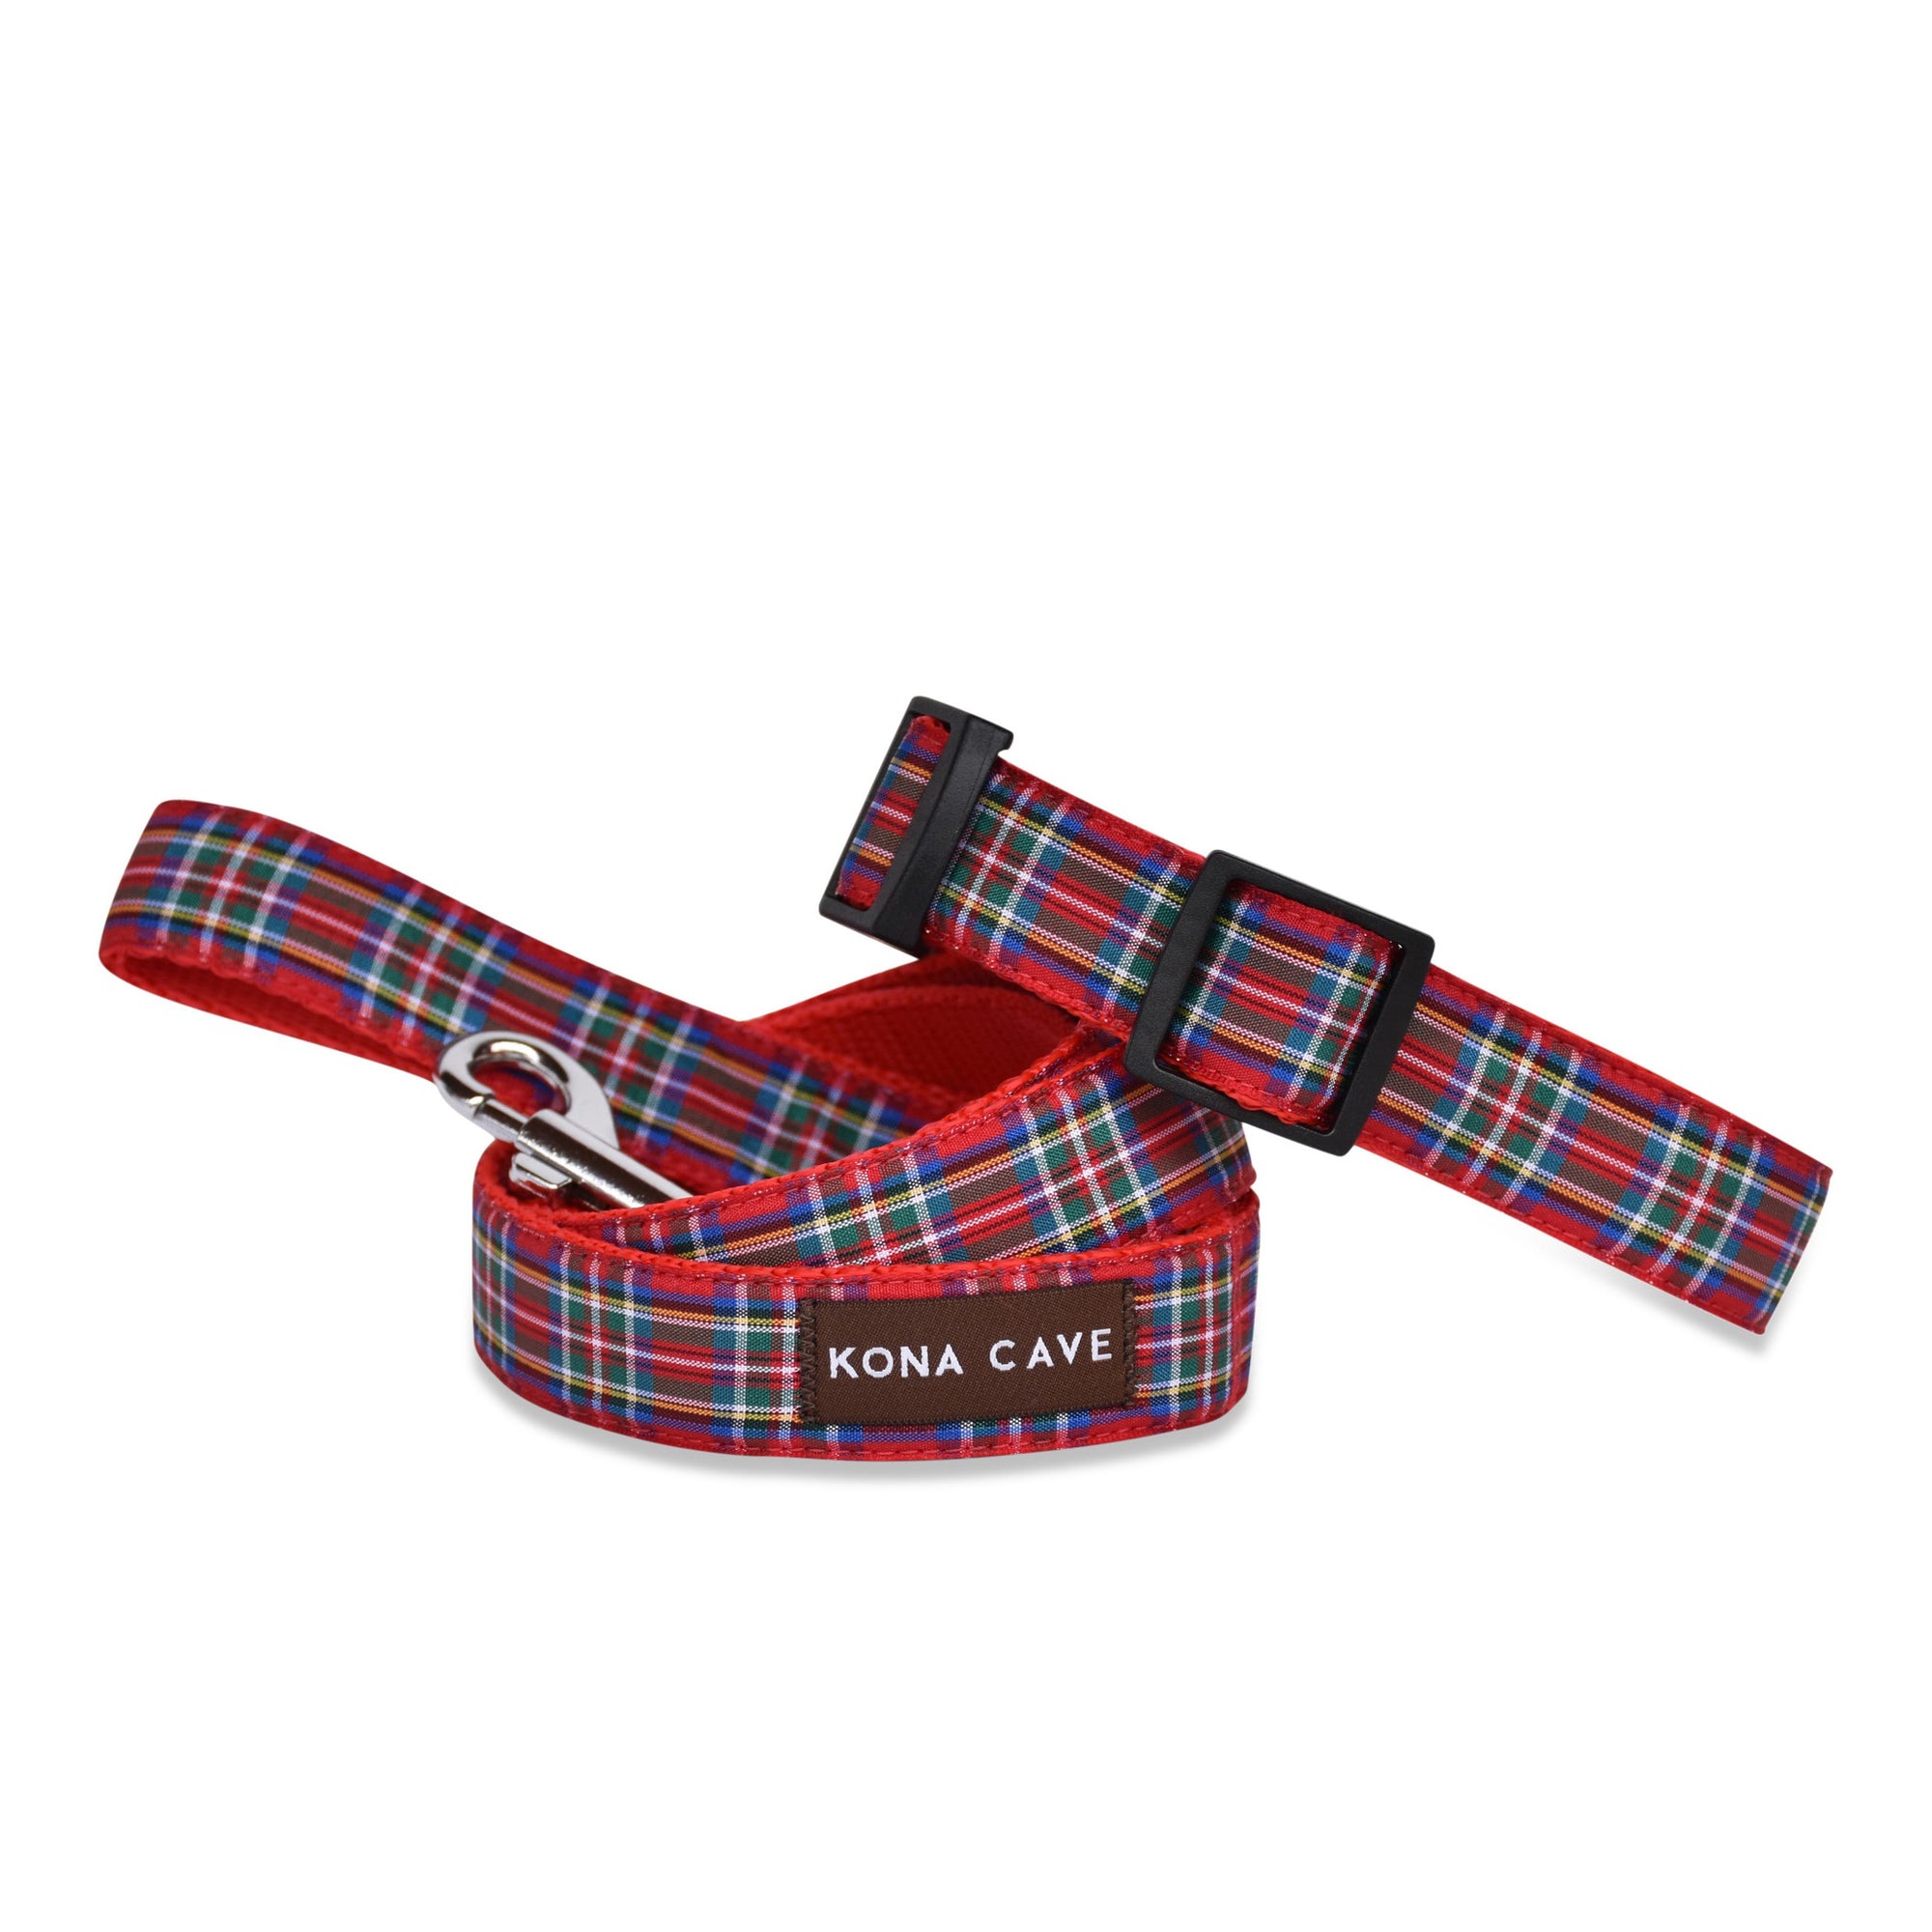 KONA CAVE ® - dog collar and leash / lead in authentic Royal Stewart tartan (red)